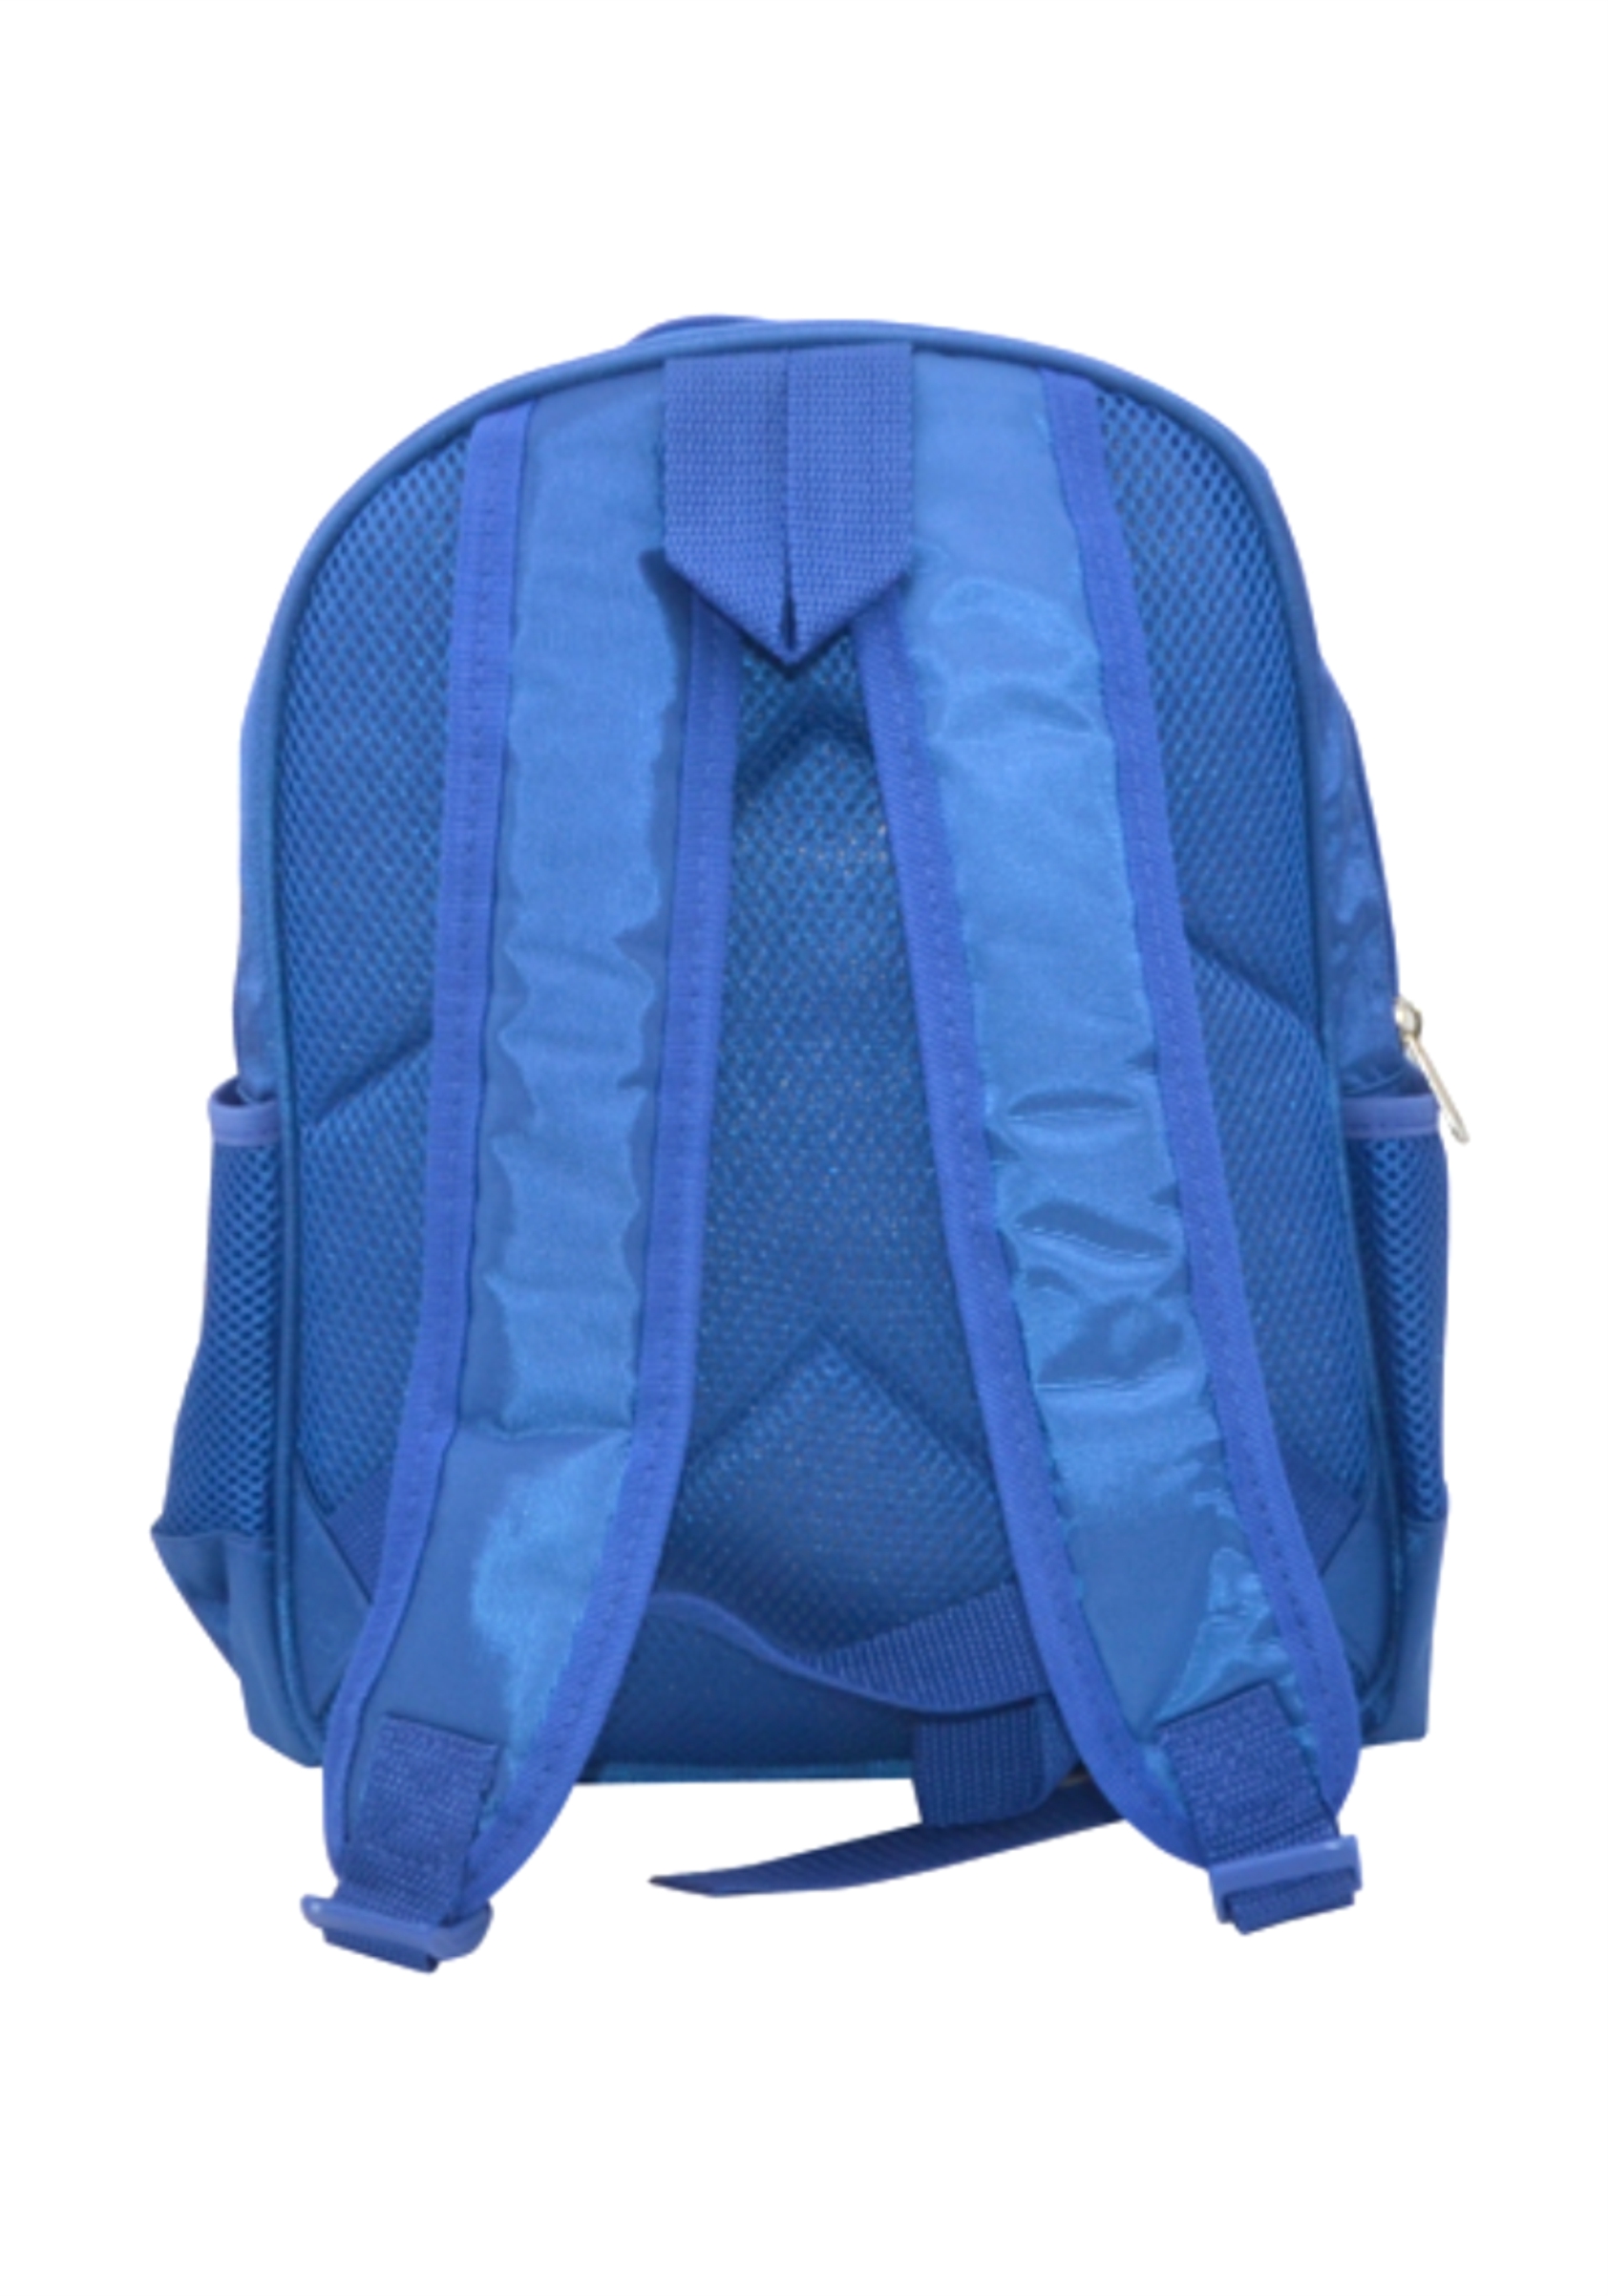 Marble Geometric Colorblock Kids Backpack Toddler - image 4 of 4